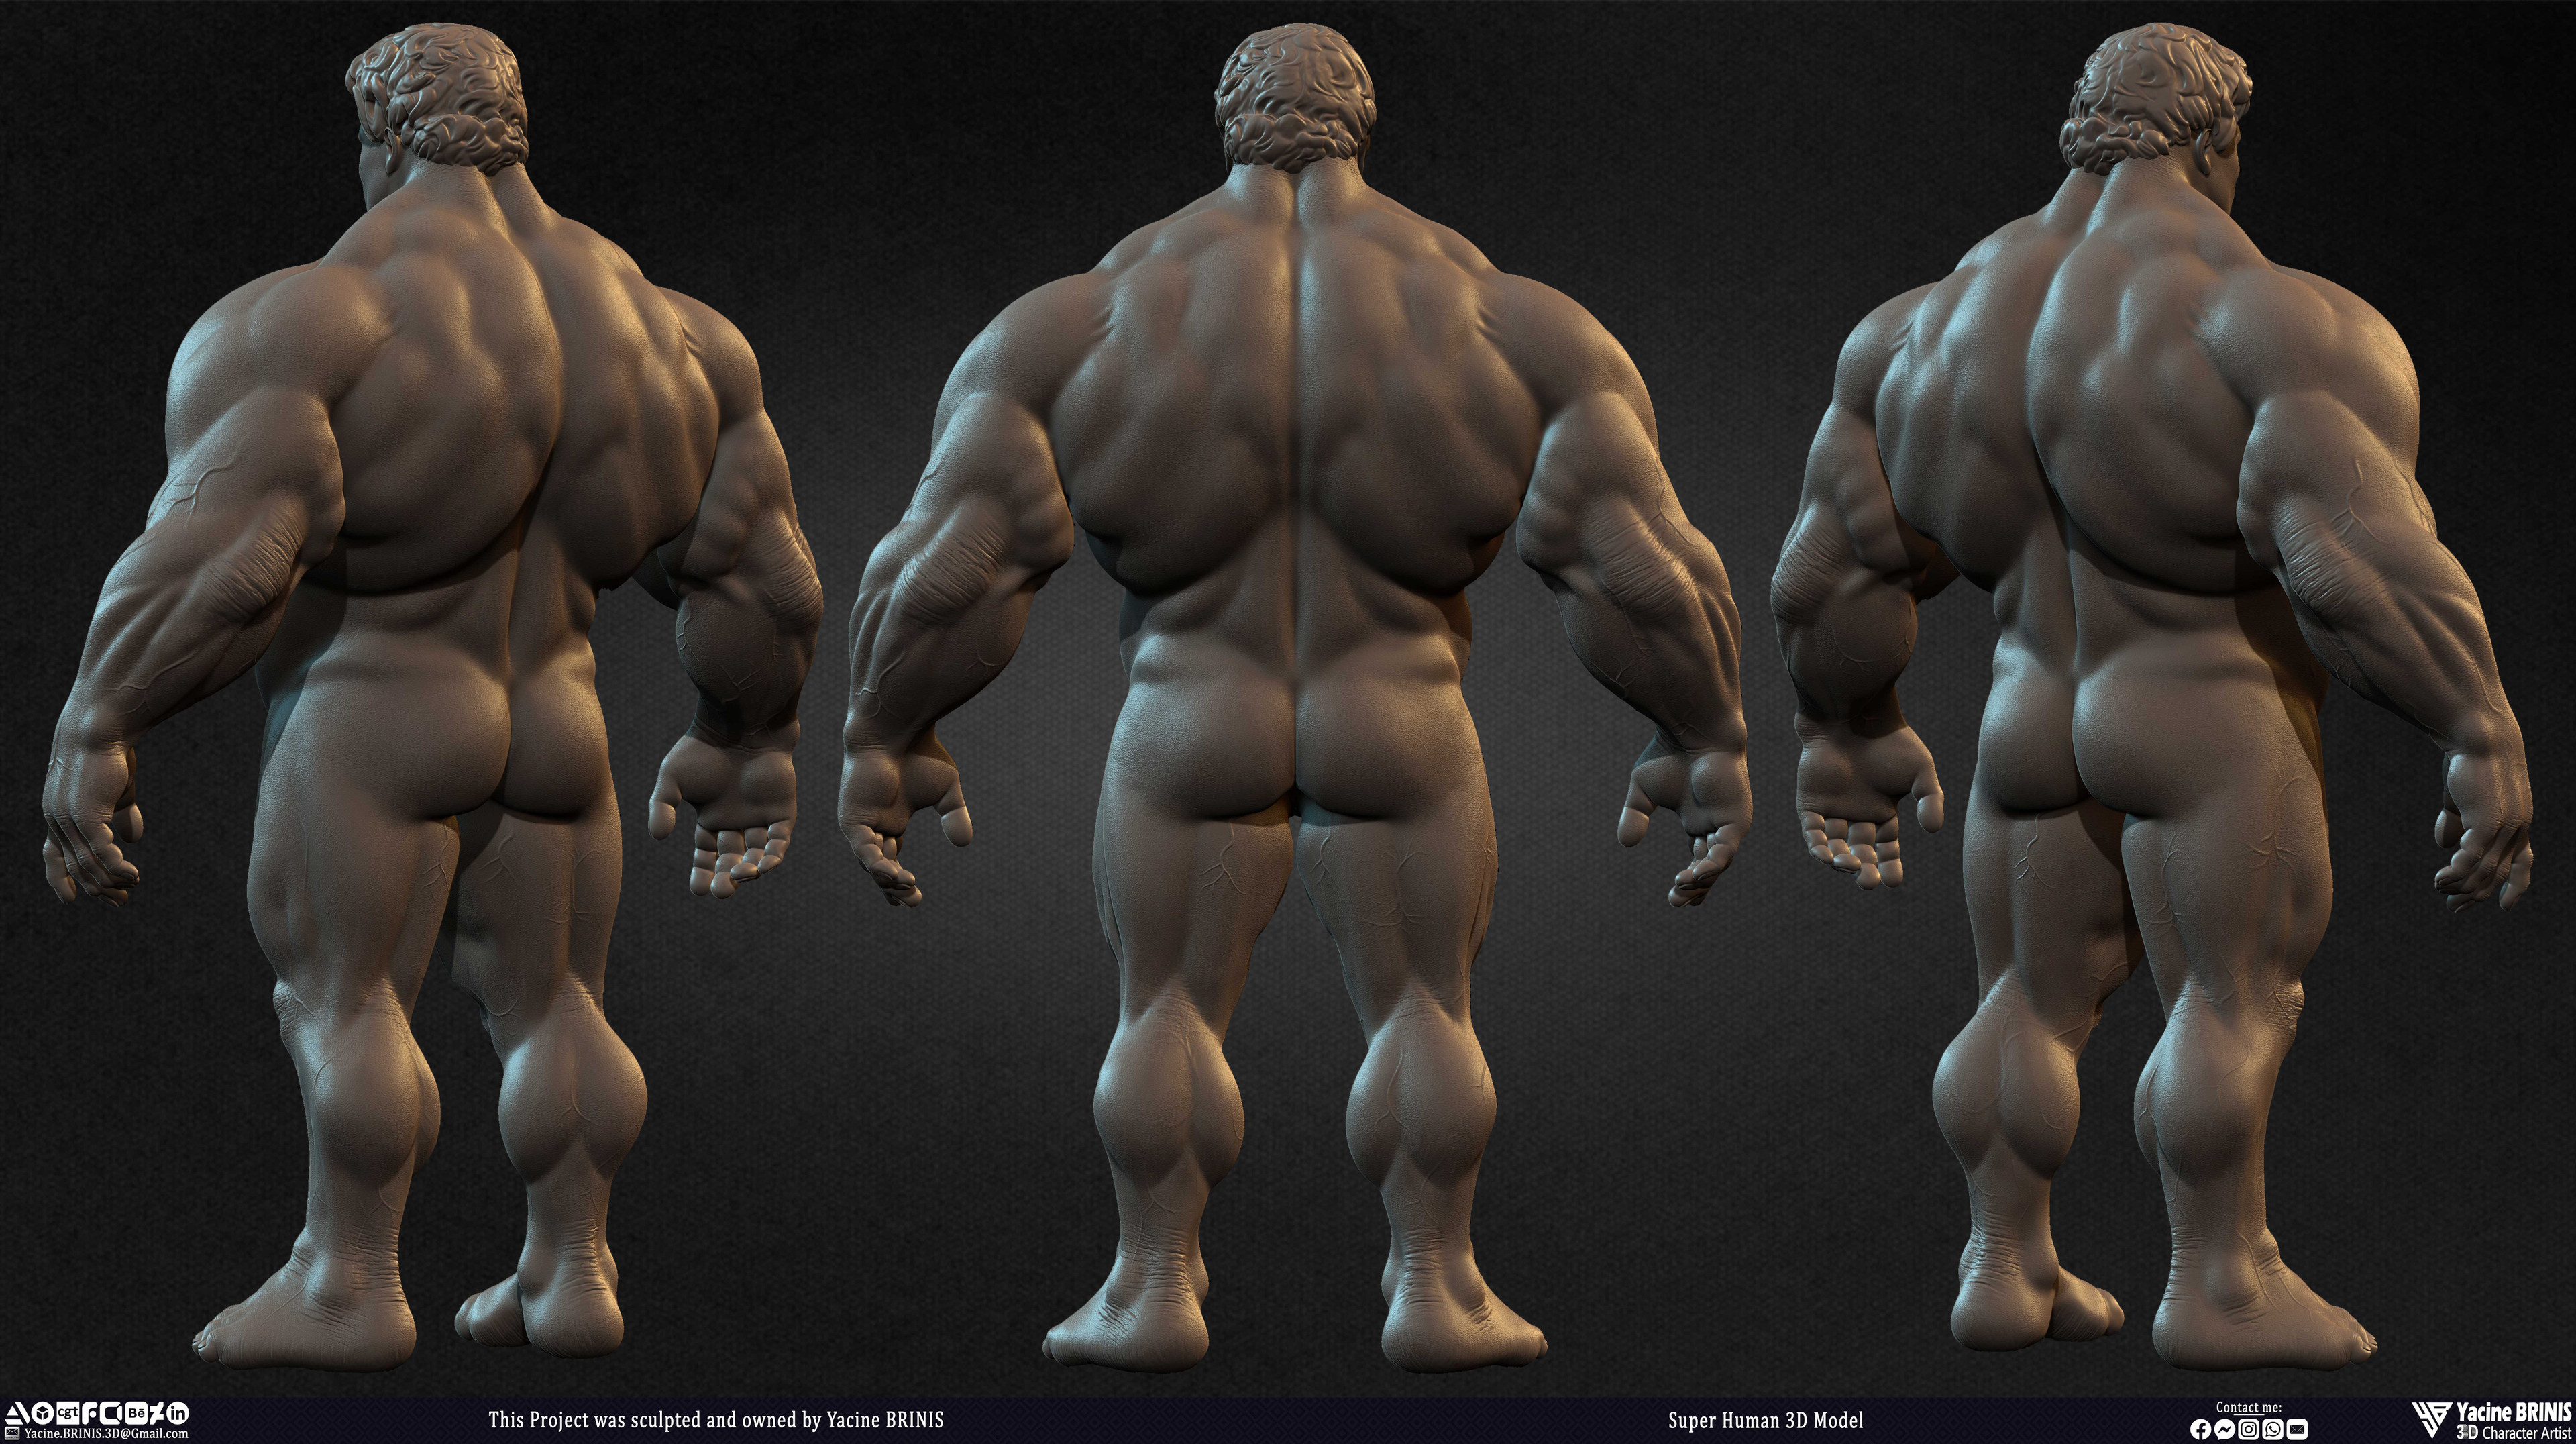 Super Human 3D Model sculpted by Yacine BRINIS 008